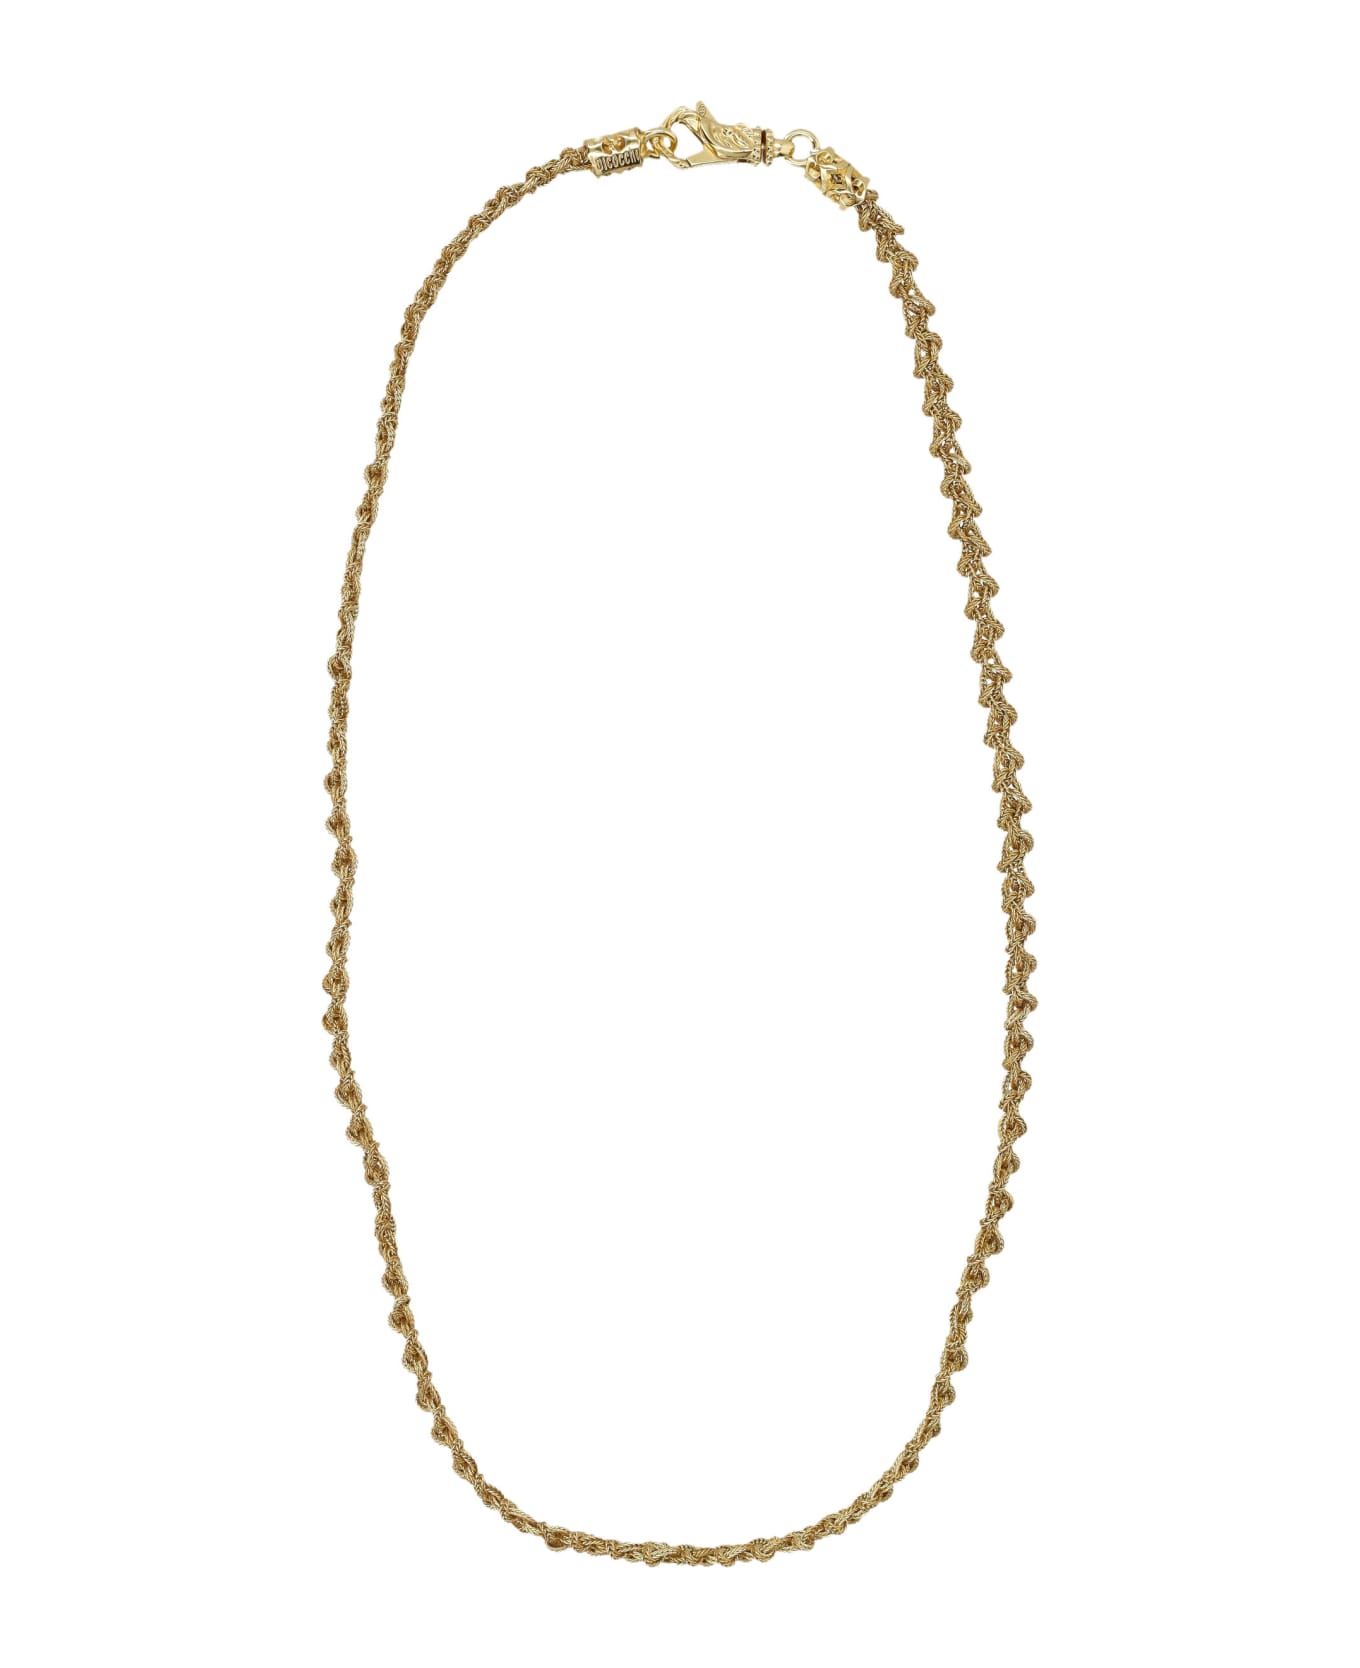 Emanuele Bicocchi Rope Chain Necklace - GOLD